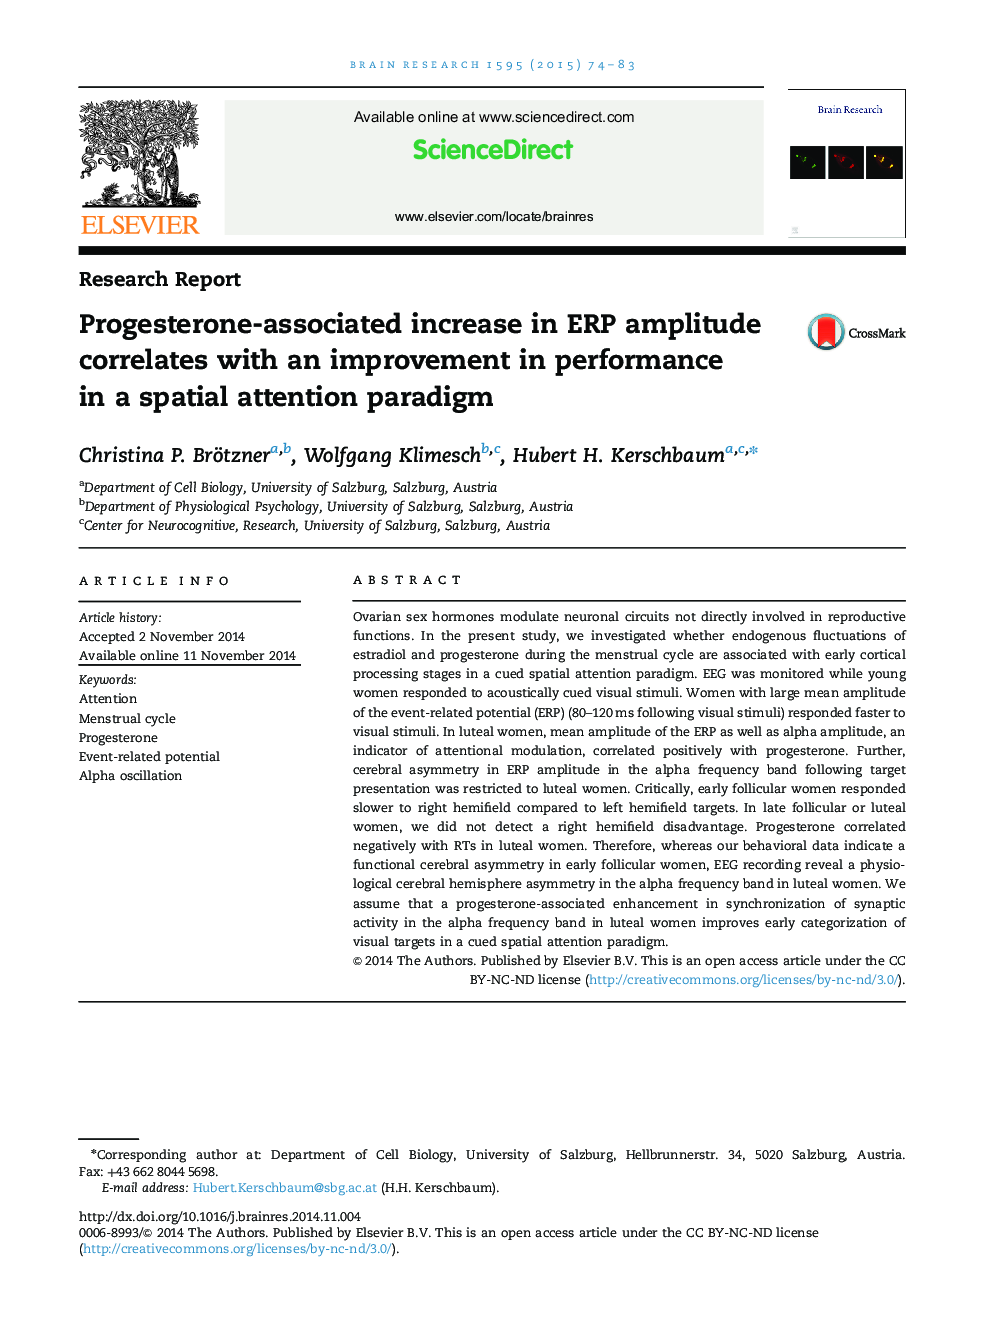 Progesterone-associated increase in ERP amplitude correlates with an improvement in performance in a spatial attention paradigm